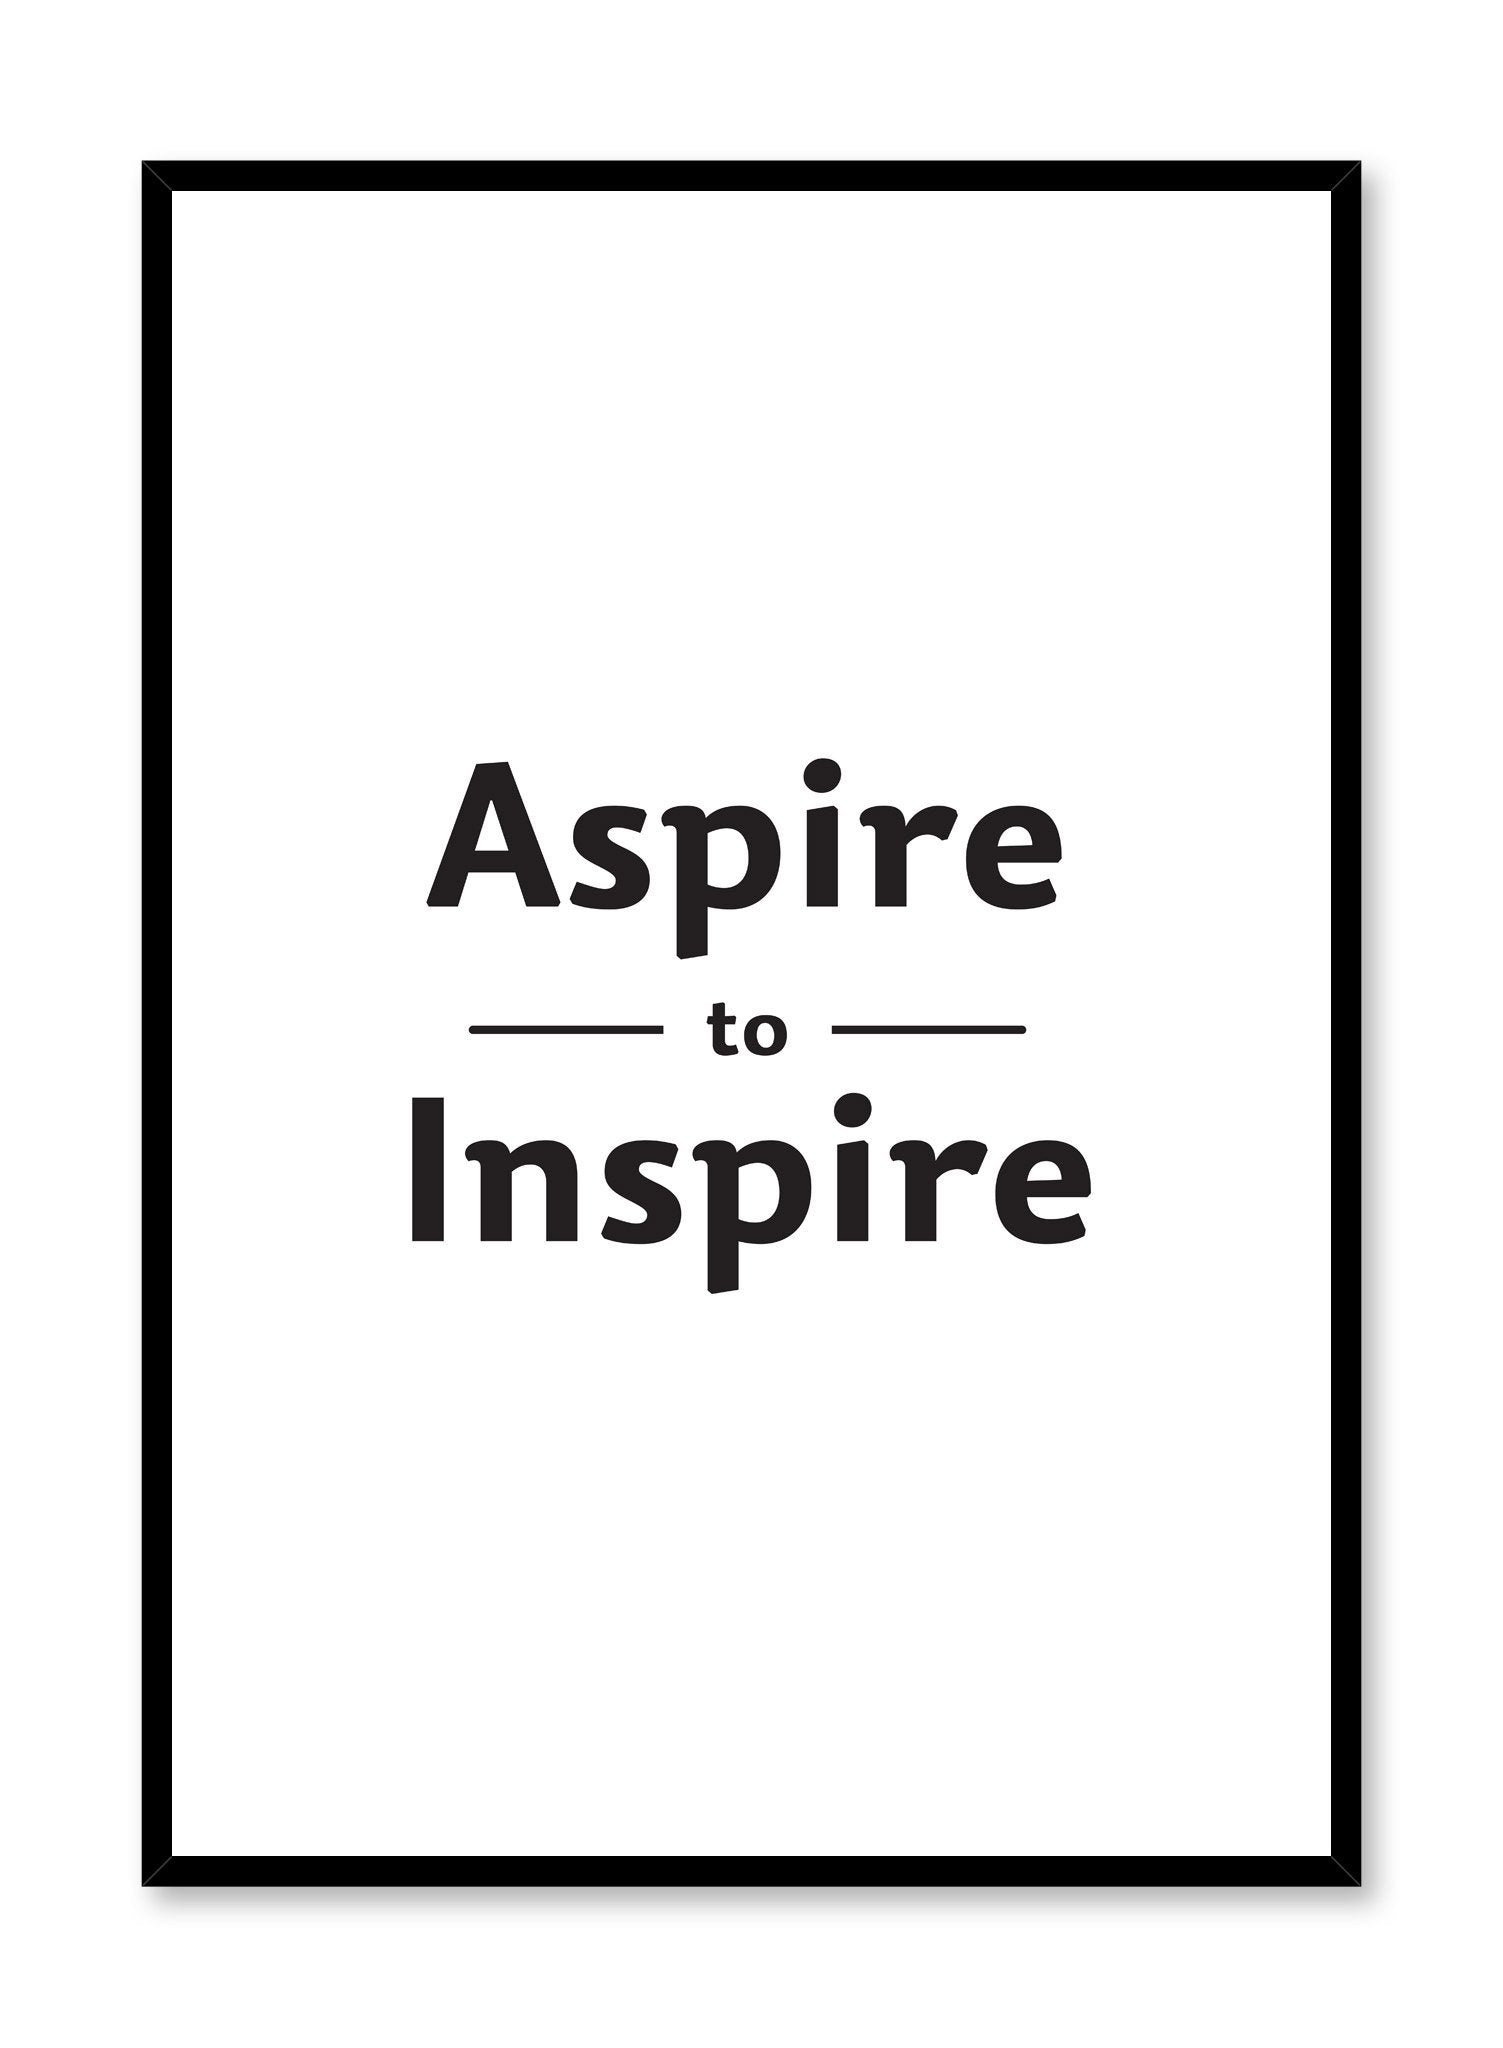 Aspire to inspire modern minimalist typography art print by Opposite Wall